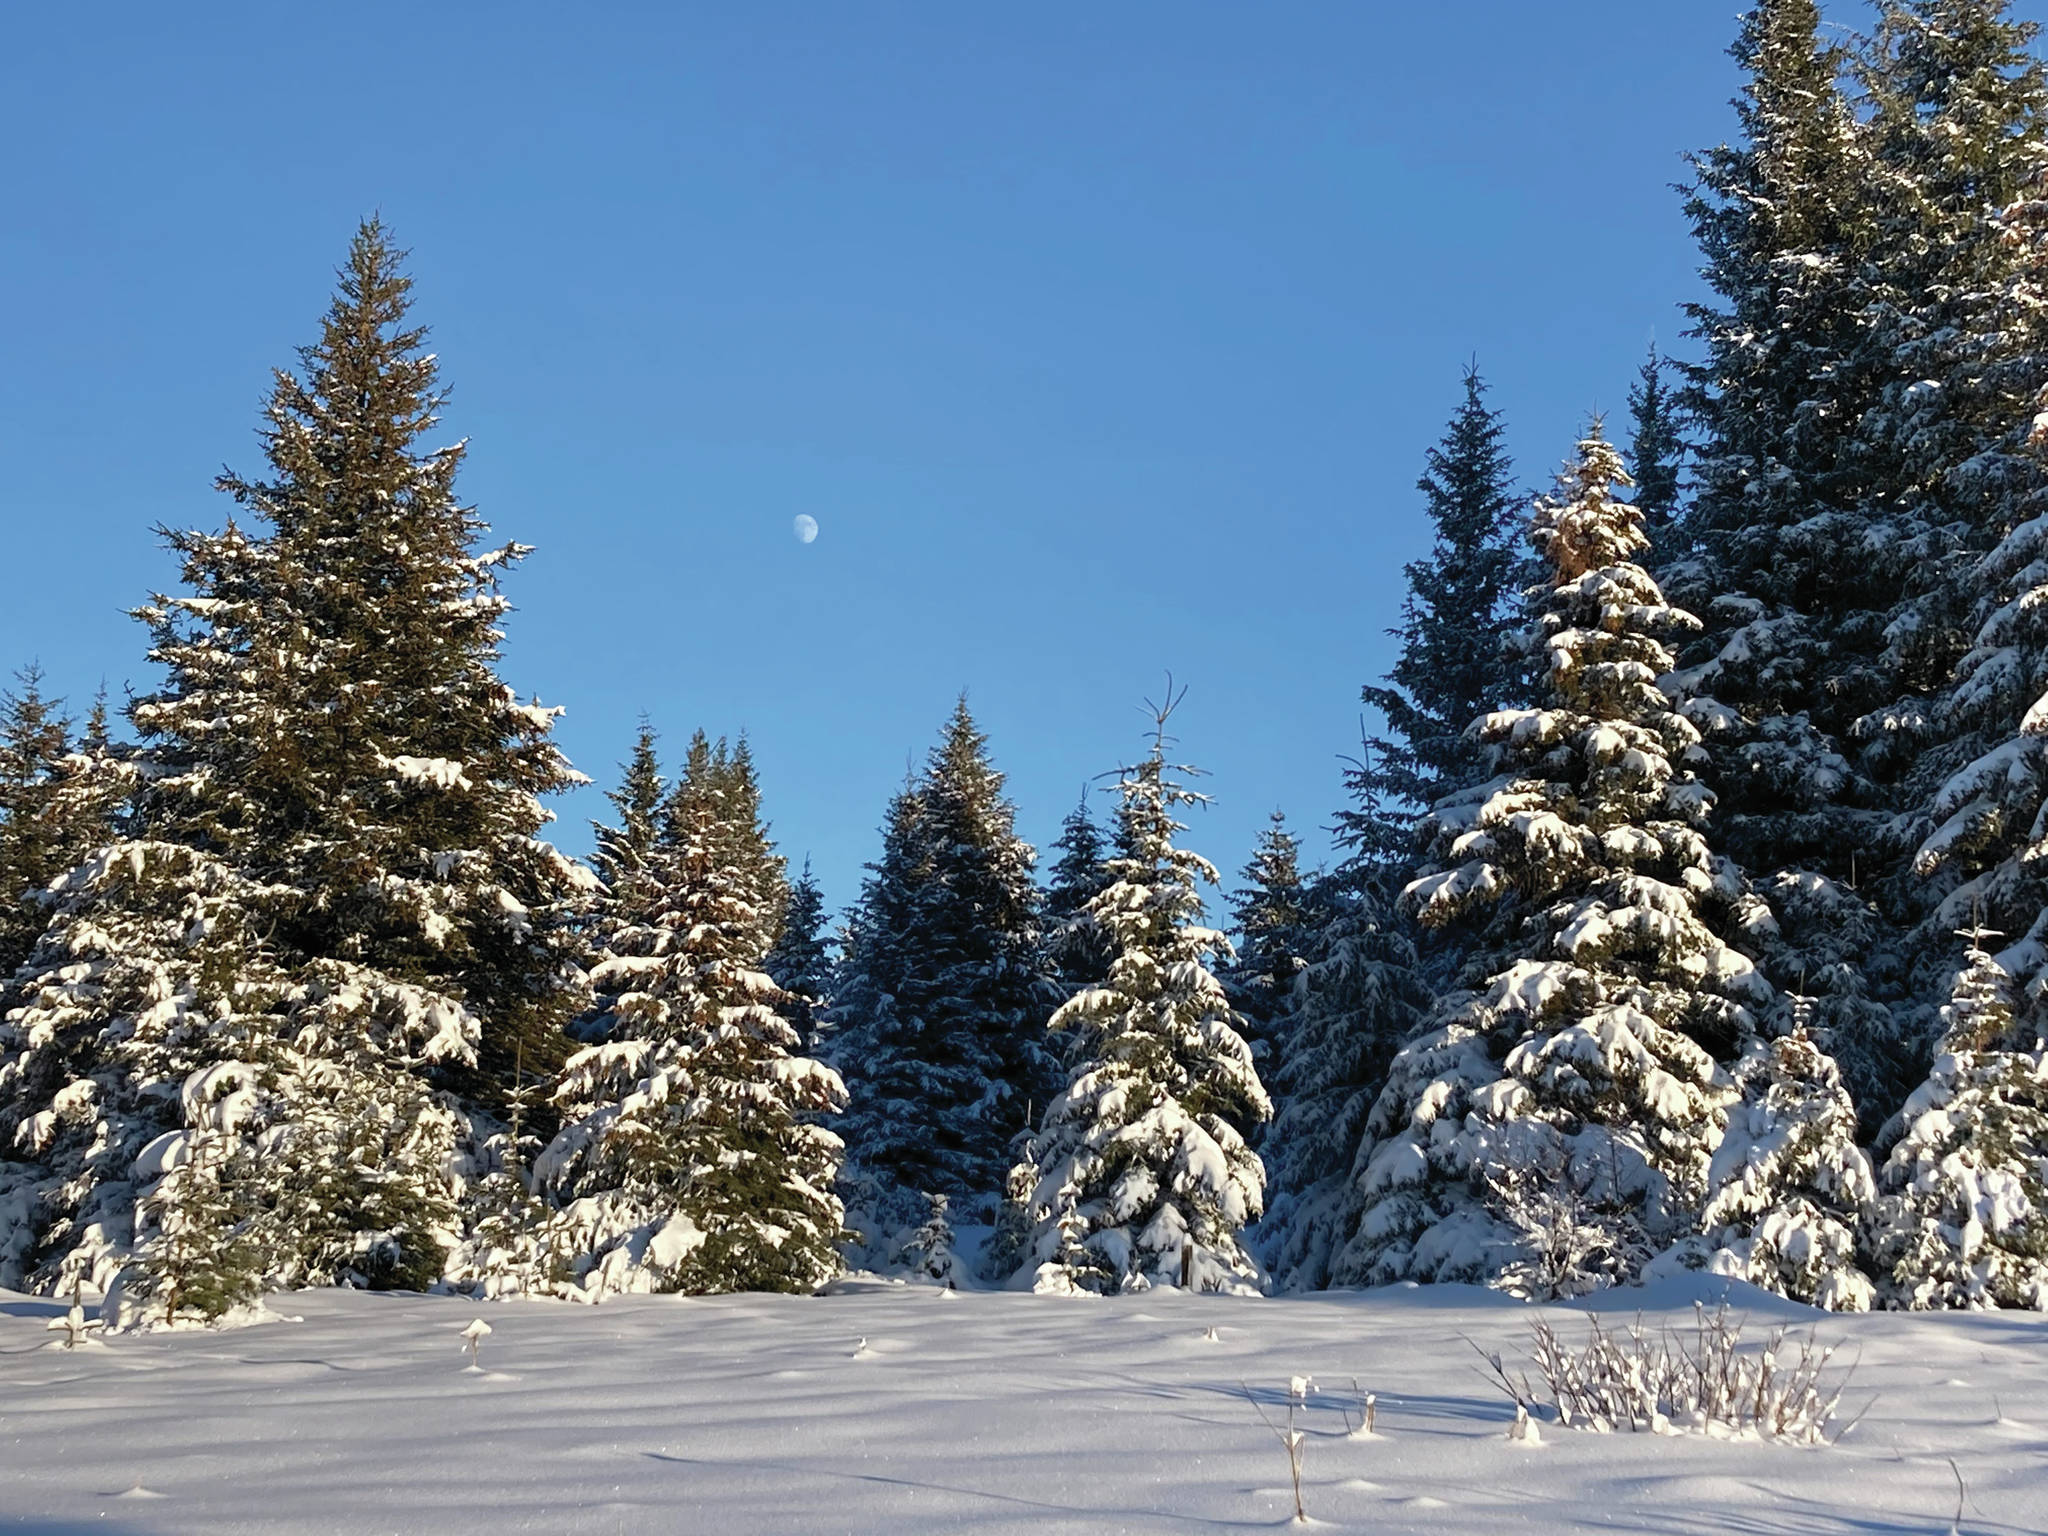 The moon rises over snow-covered spruce trees on Sunday, Jan. 24, 2021, on Diamond Ridge near Homer, Alaska. About 4 feet of snow has fallen on Diamond Ridge this winter, nearly covering elderberry bushes and pushki stalks. (Photo by Michael Armstrong/Homer News)